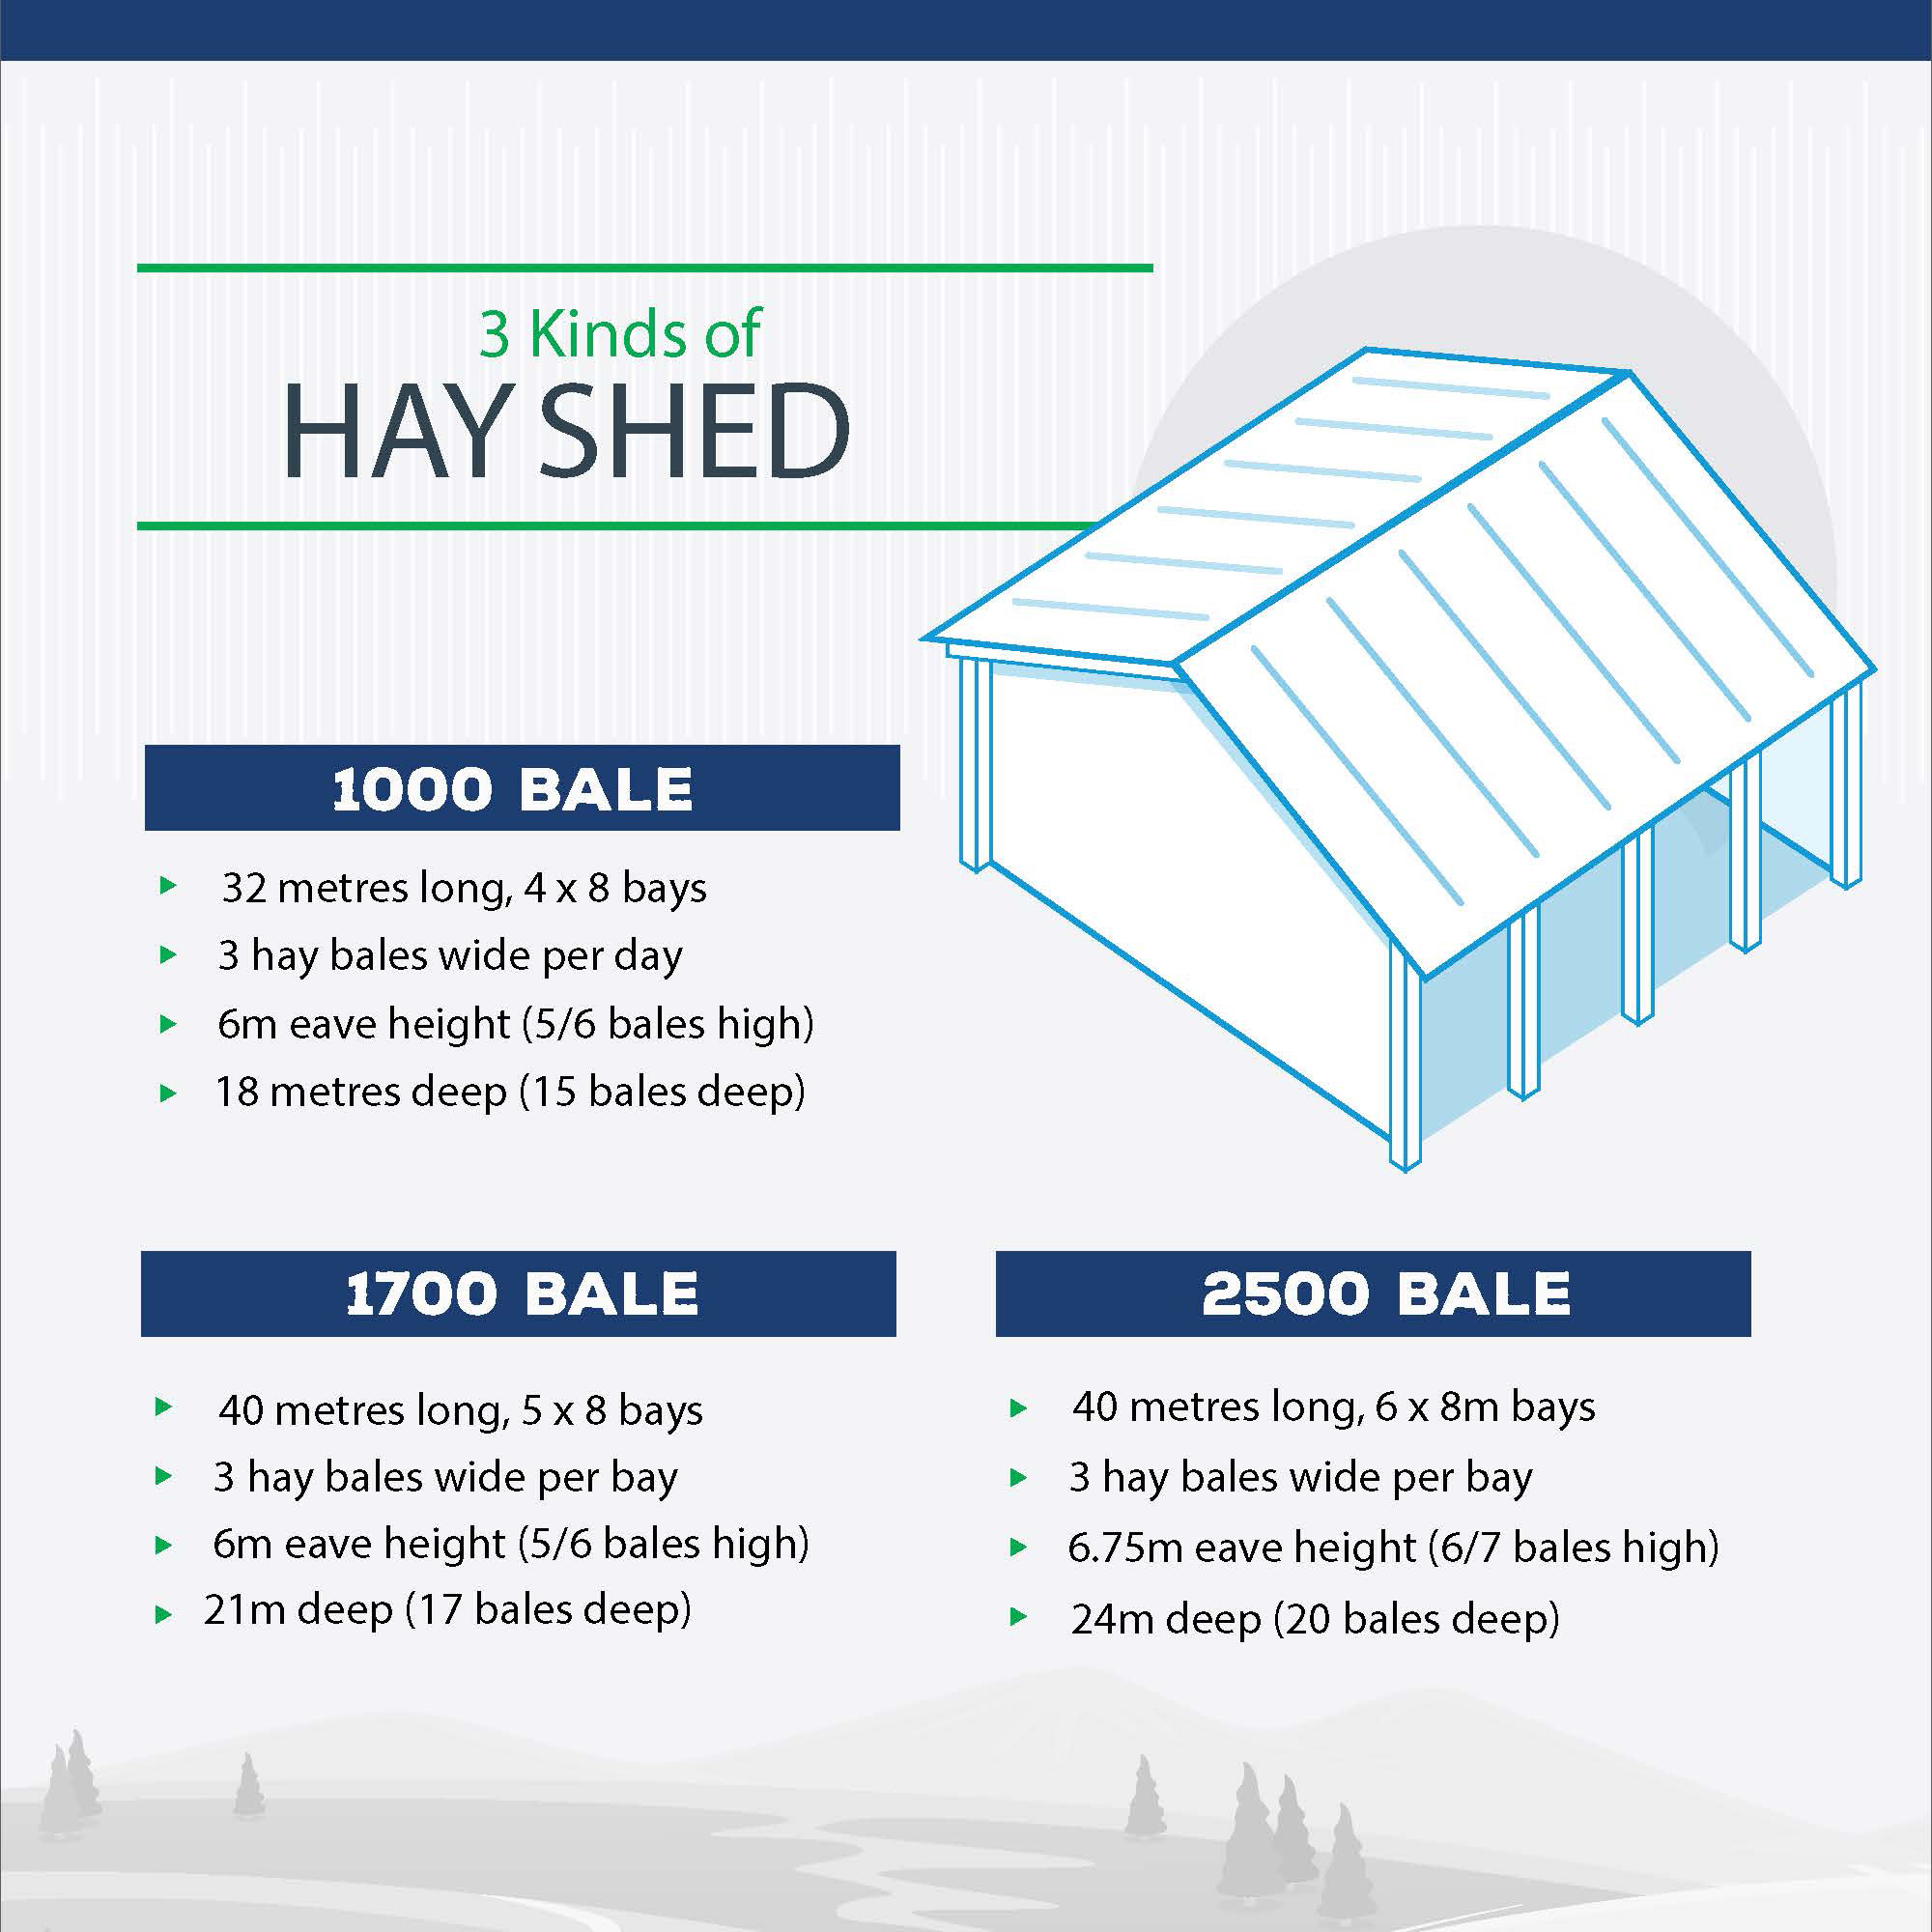 https://www.entegra.com.au/wp-content/uploads/2020/02/Opt.3-Kinds-of-Hay-Shed_Infographic_Страница_2.jpg